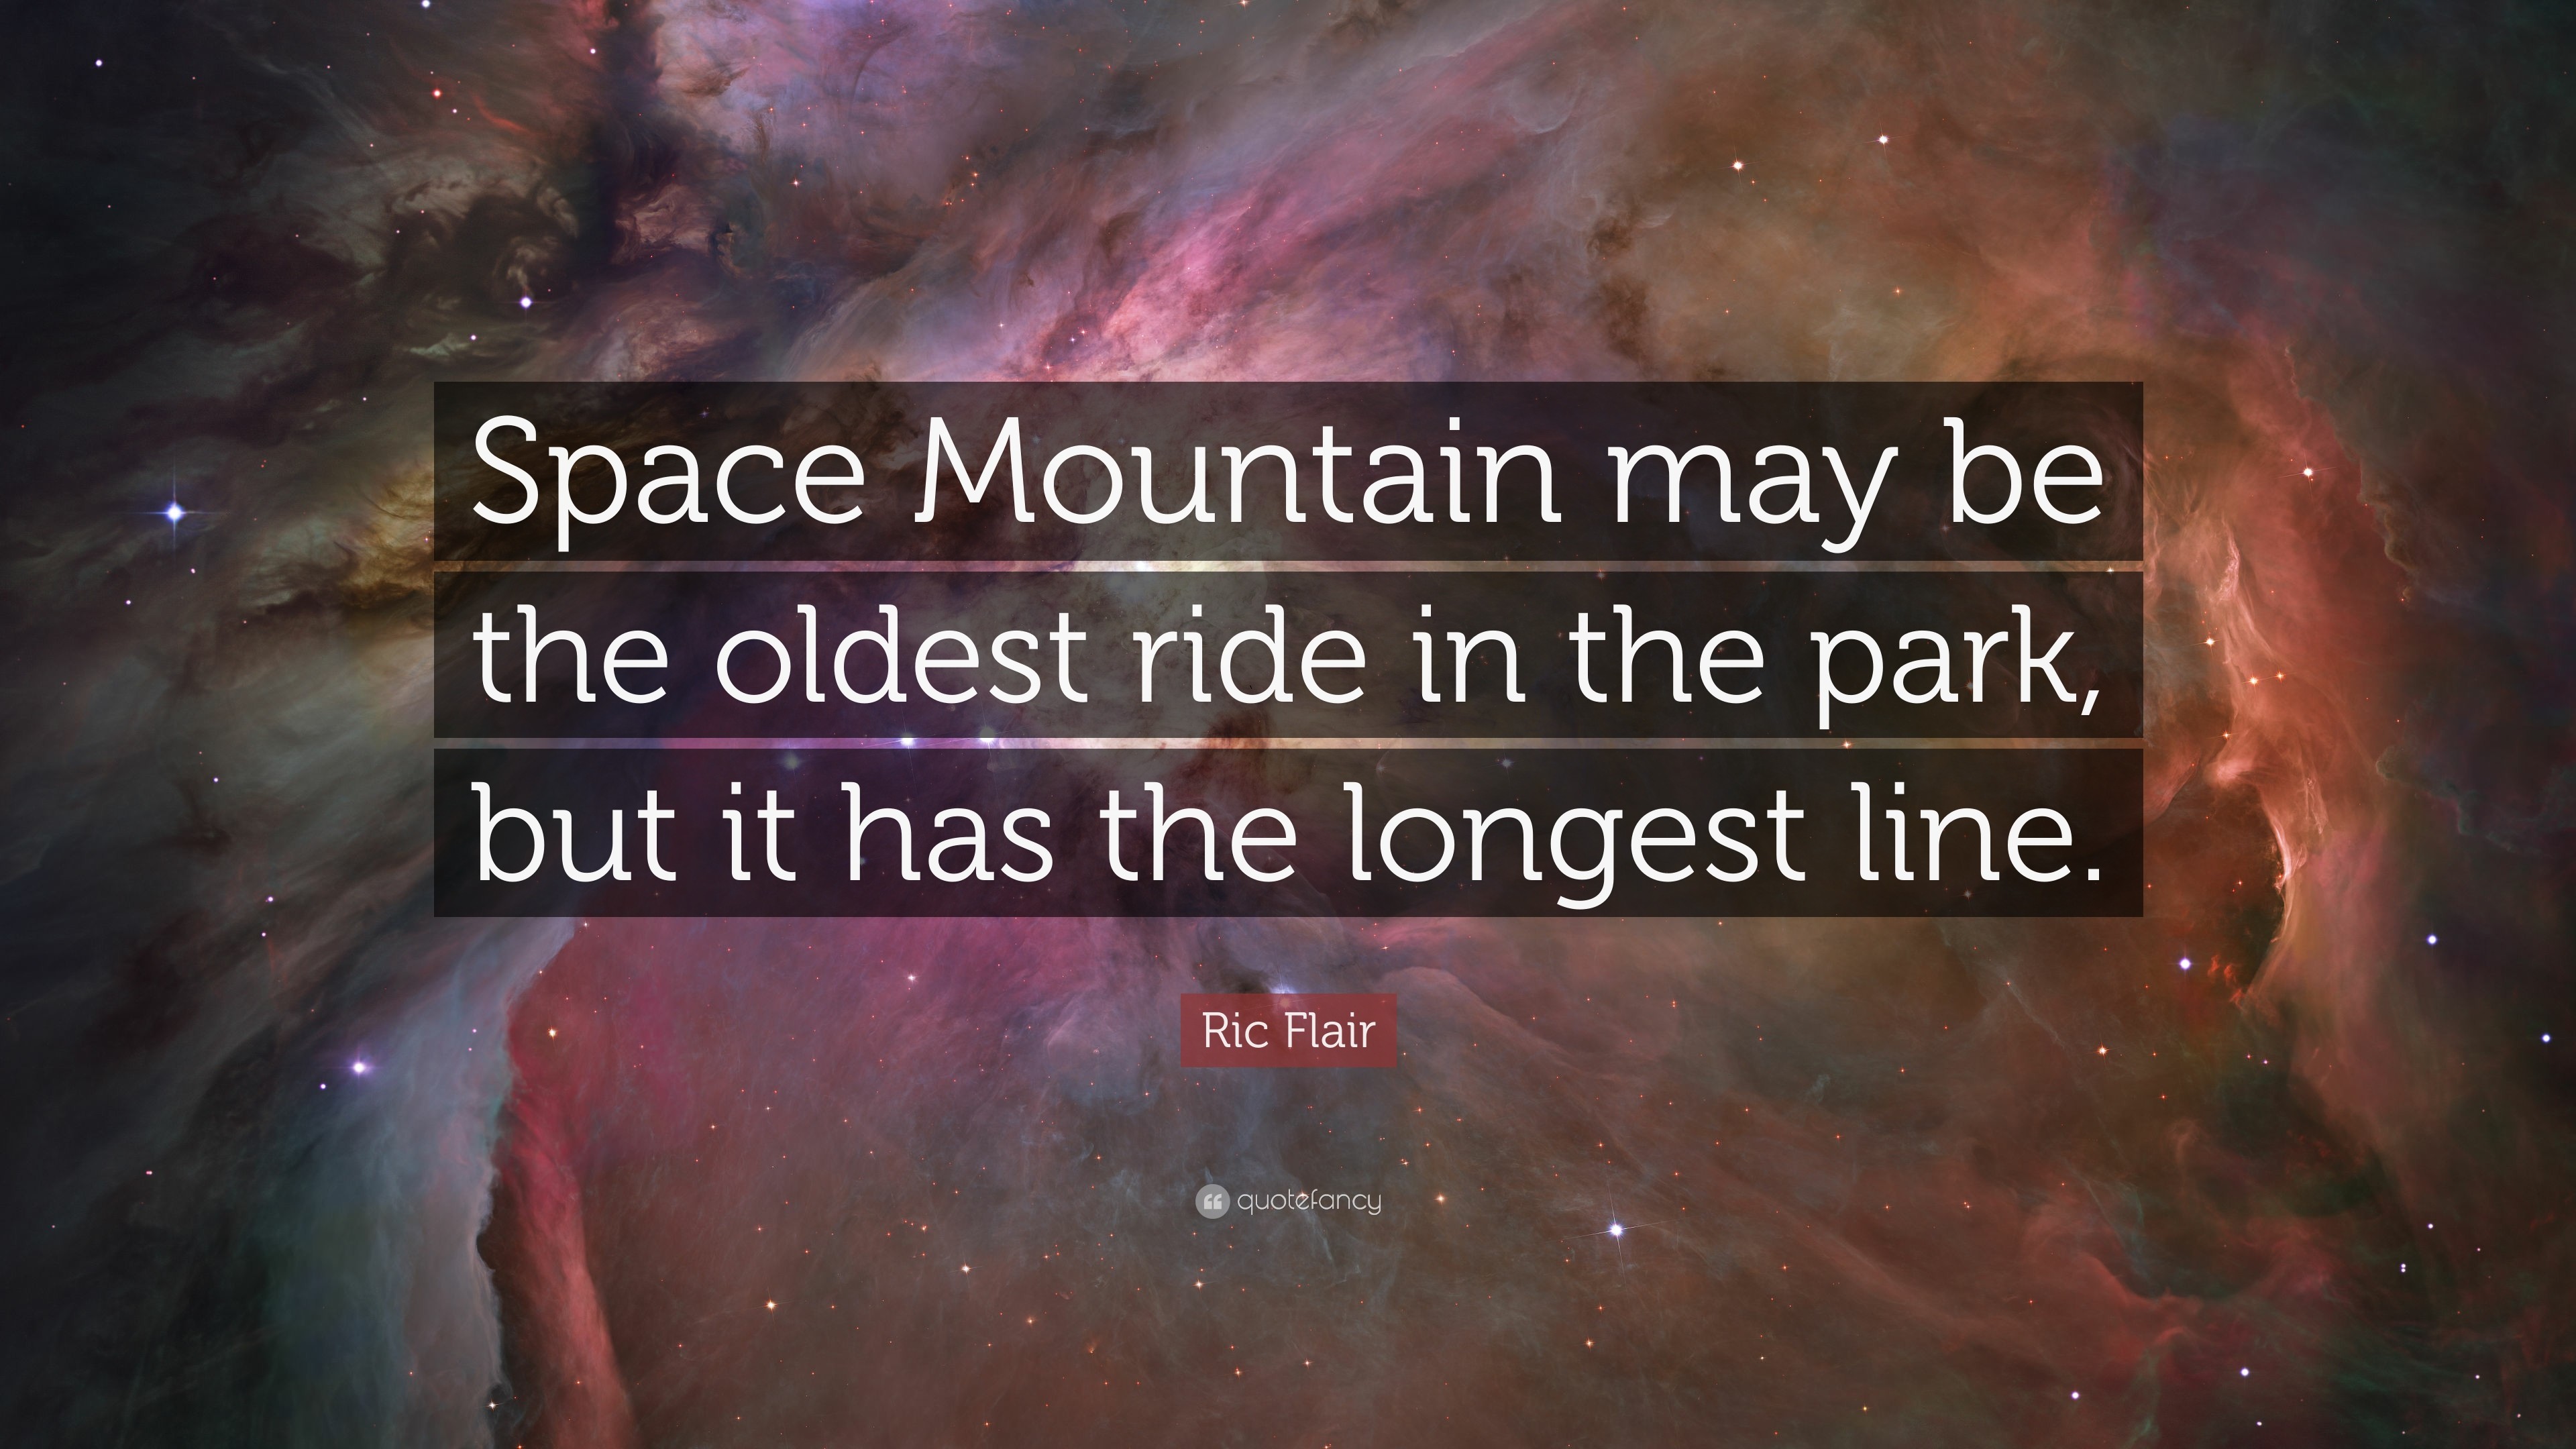 3840x2160 Ric Flair Quote: “Space Mountain may be the oldest ride in the park,